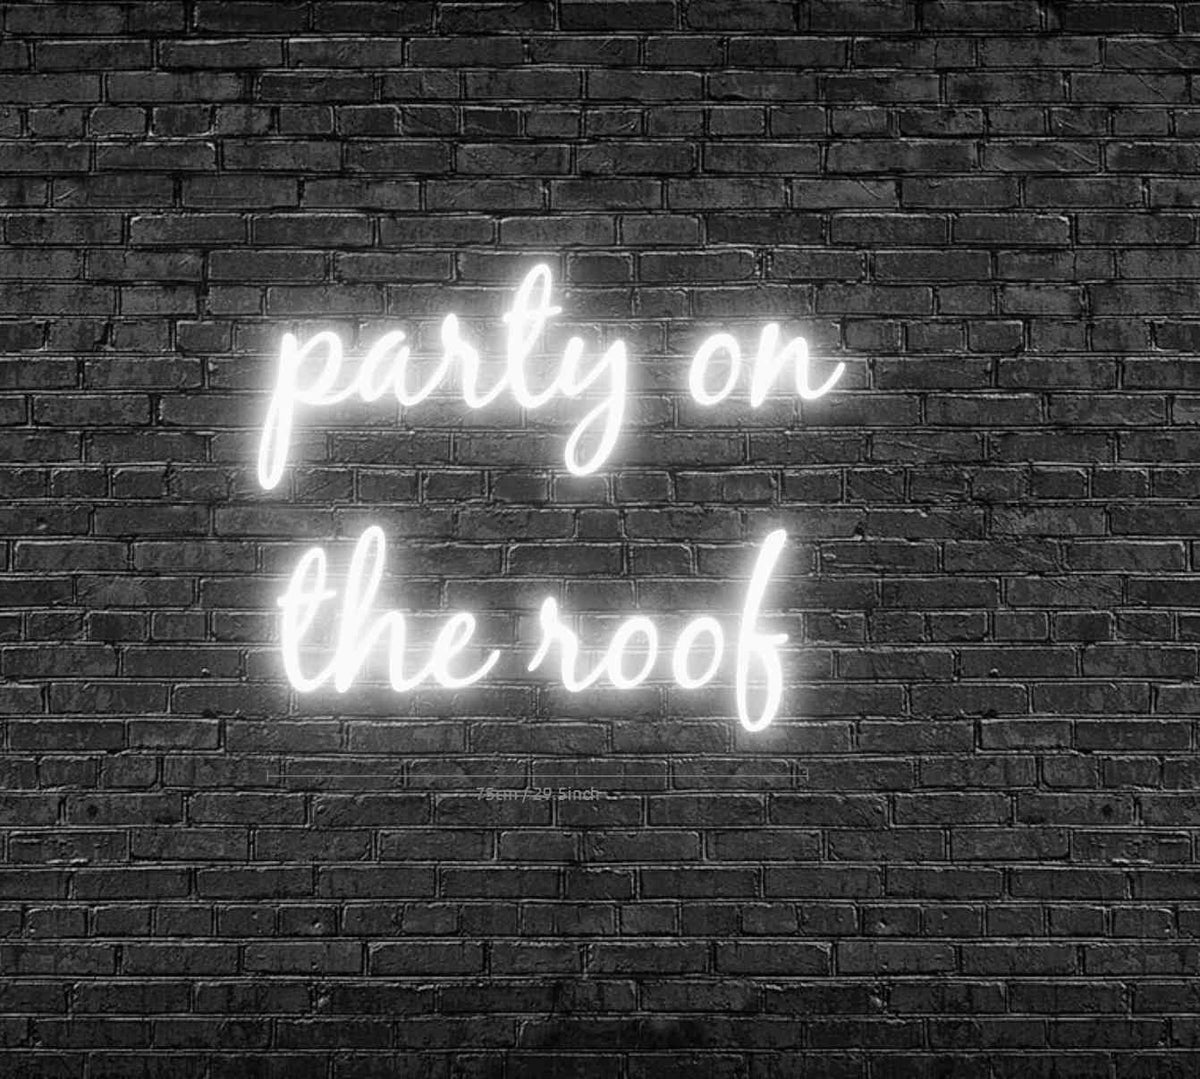 Custom Order: party on the roof